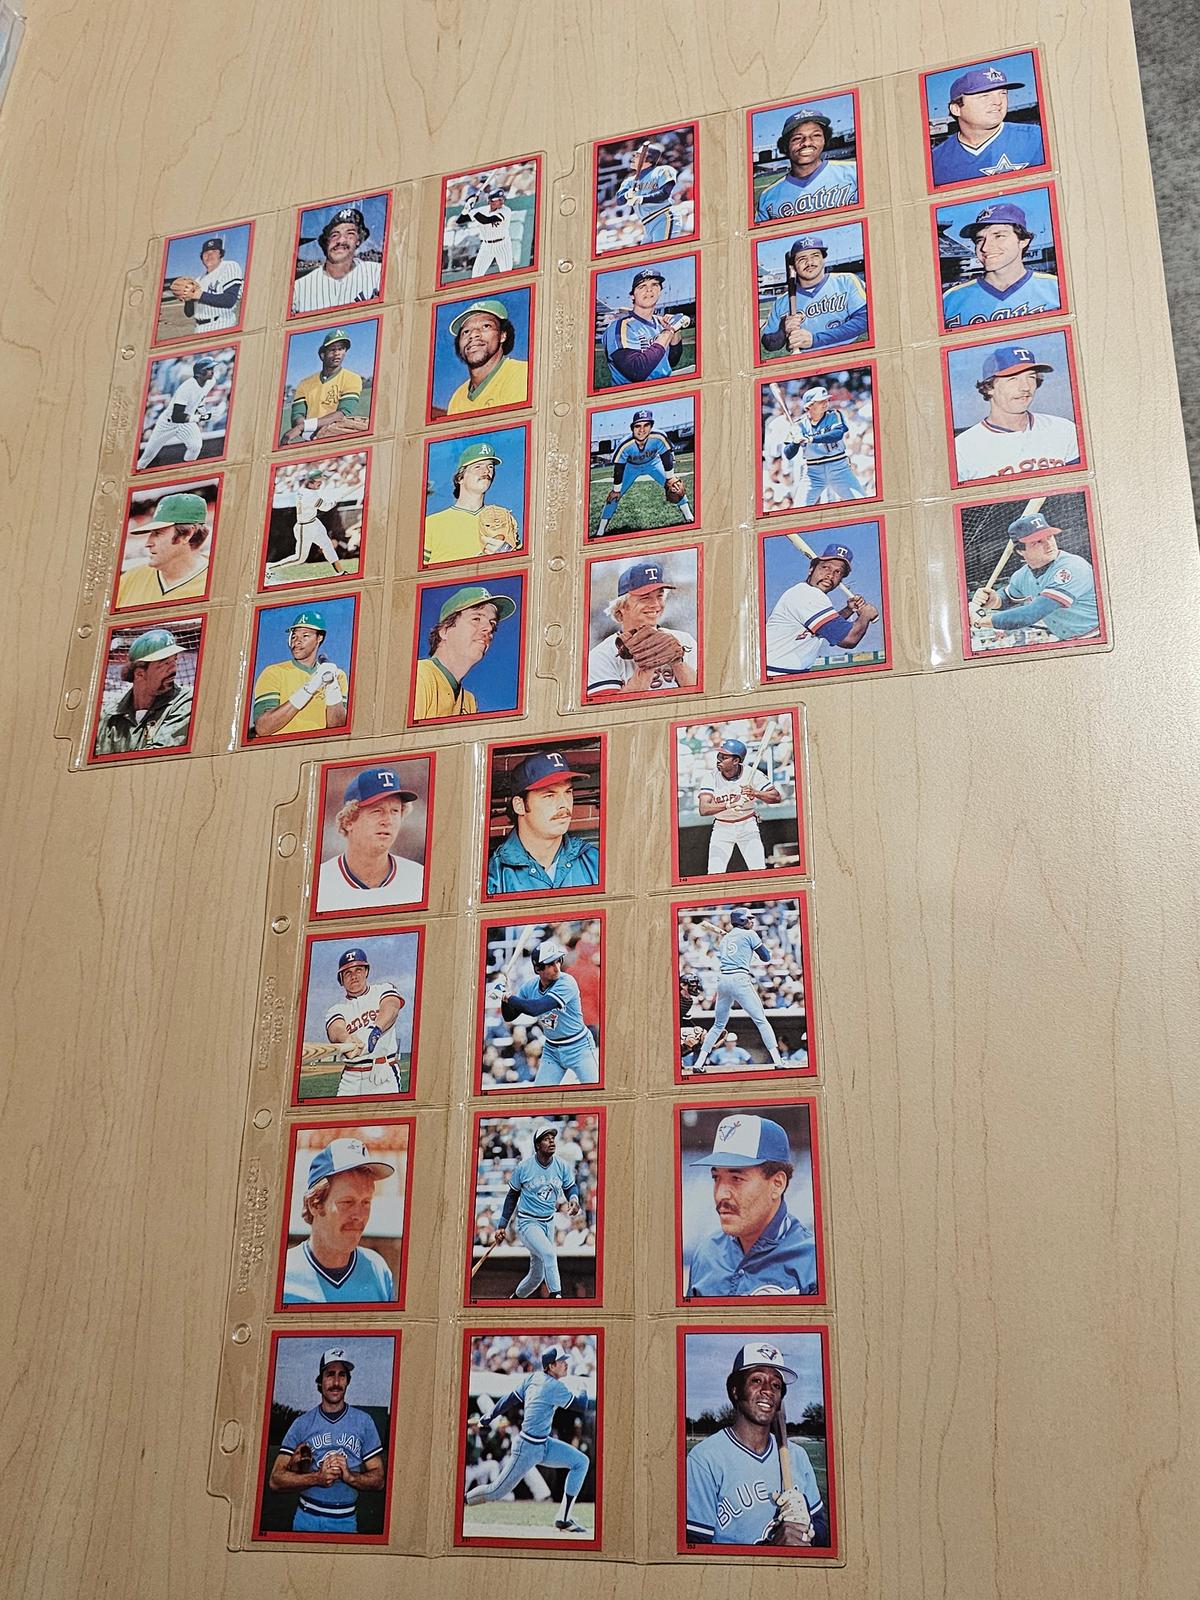 Assorted Baseball Trading Cards in Plastic Protective Sheets